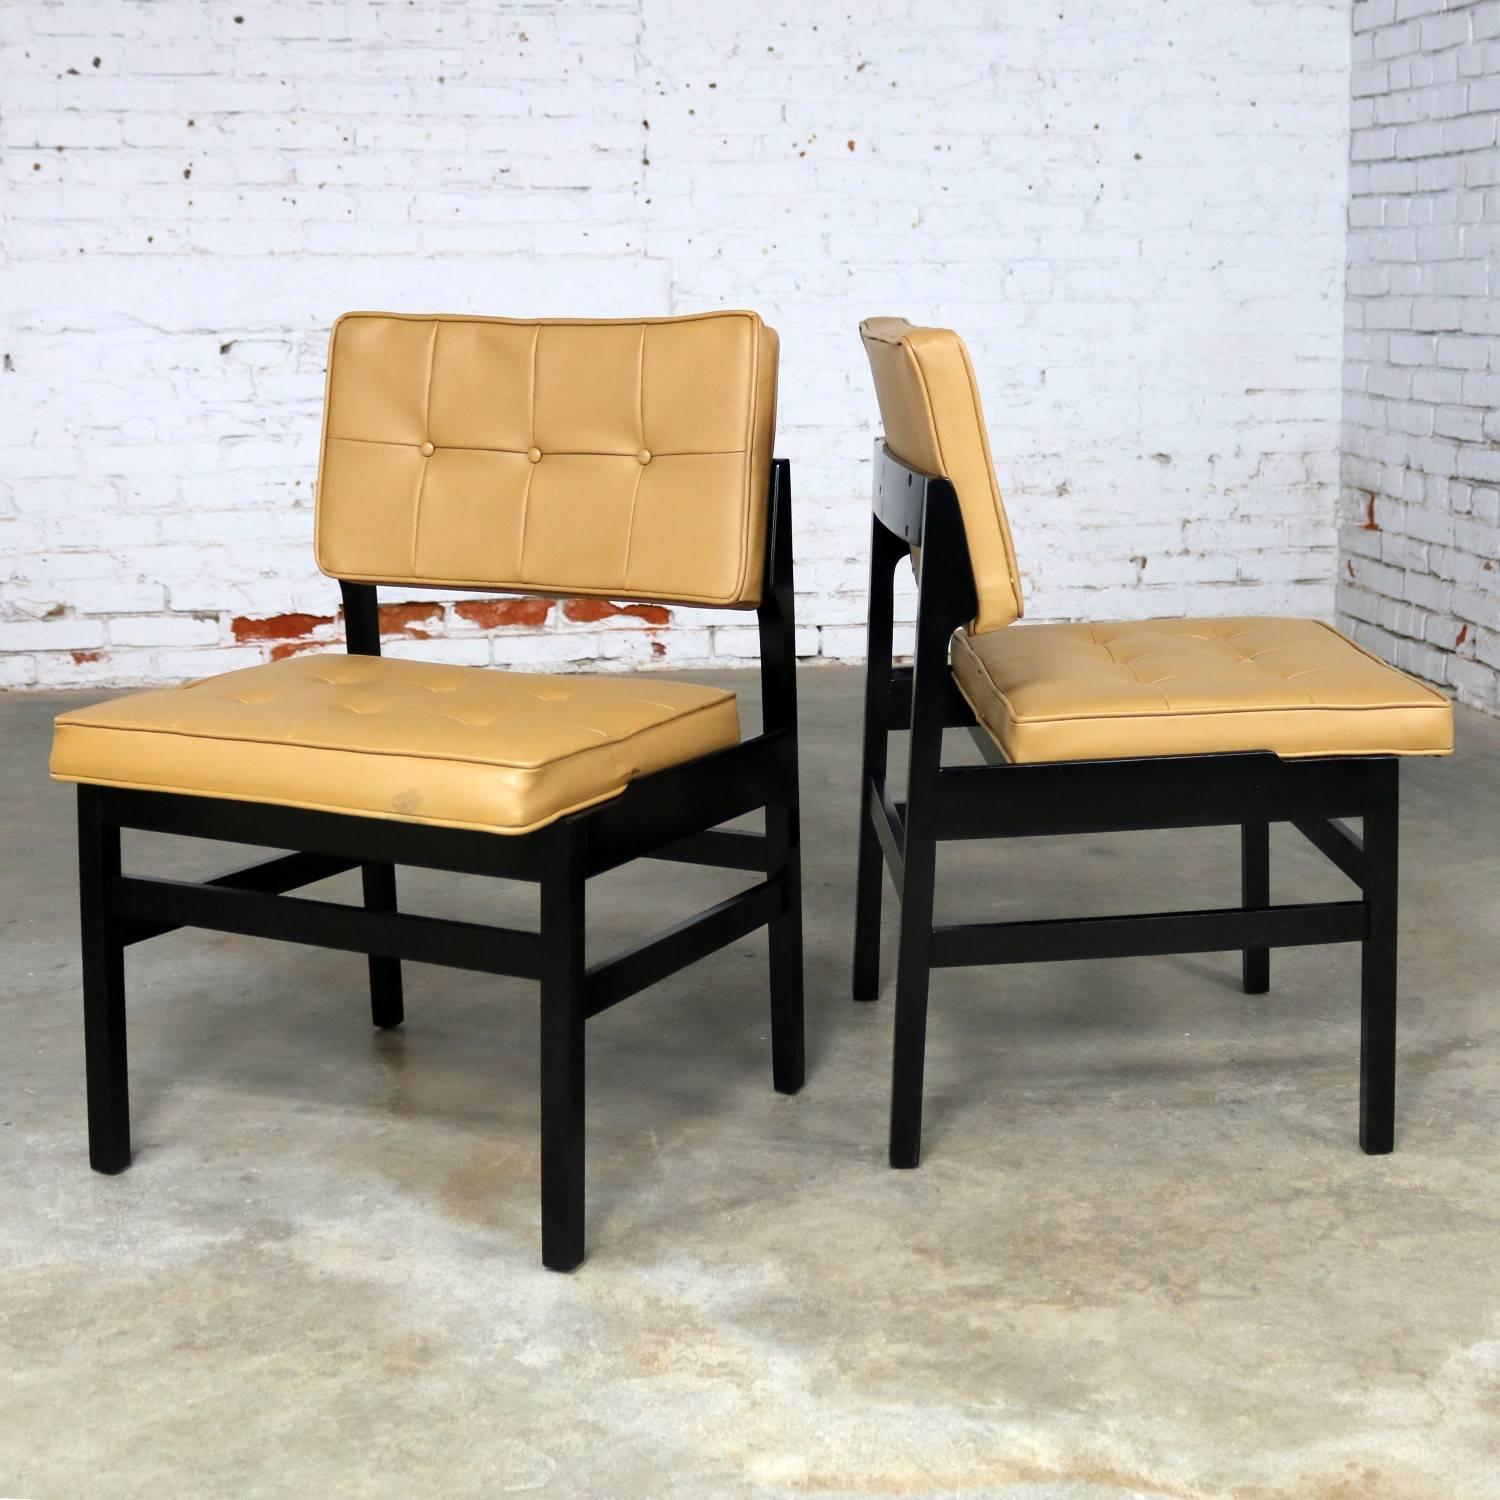 Pair of Hibriten Blackened Wood and Faux Leather Mid-Century Modern Chairs For Sale 2